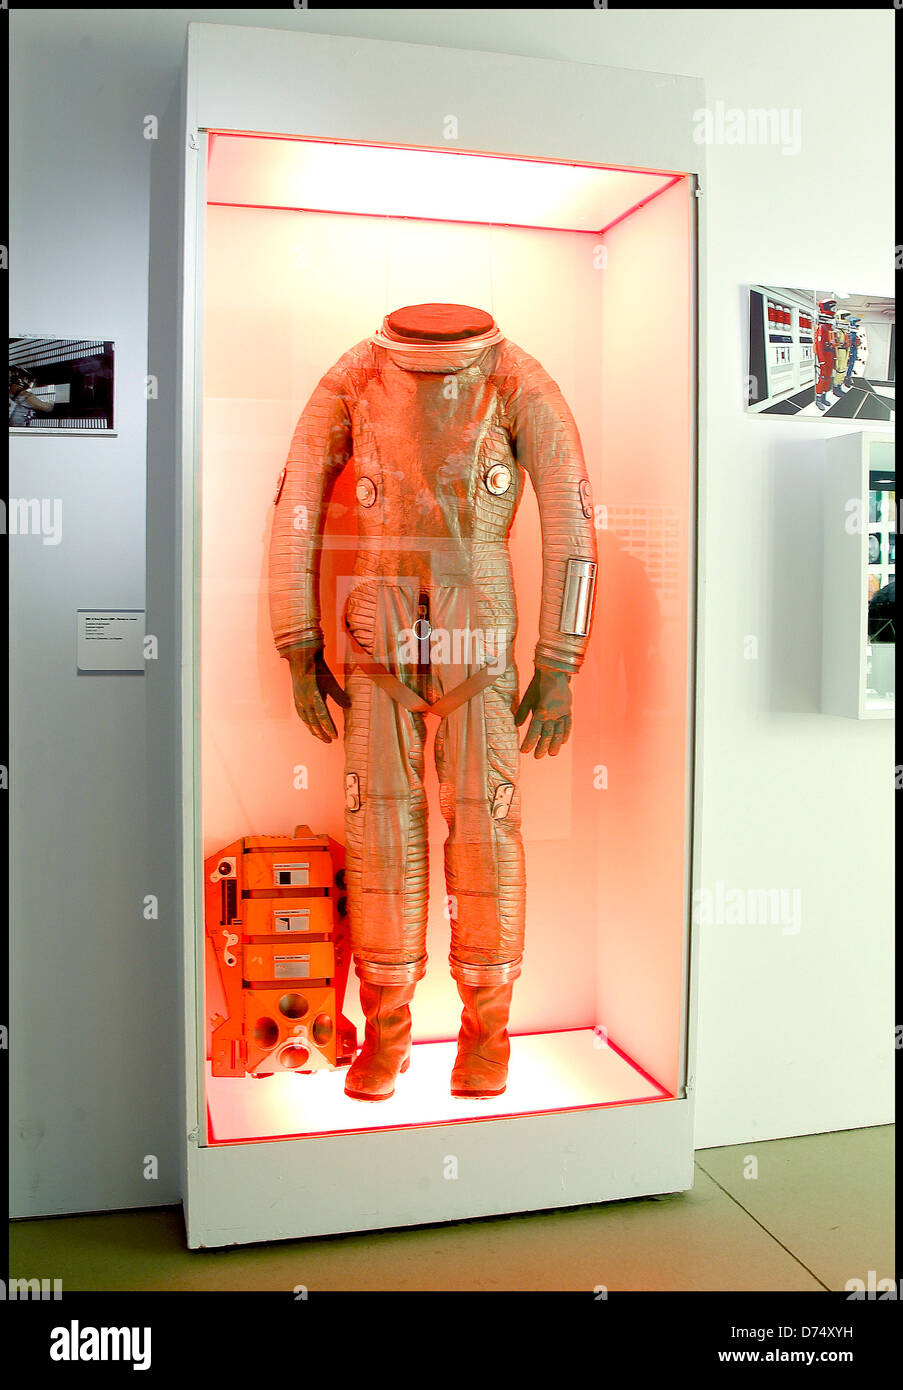 Costume for the film '2001: A Space Odyssey' Stanley Kubrick exhibition featuring movie props and costumes, held at Stock Photo